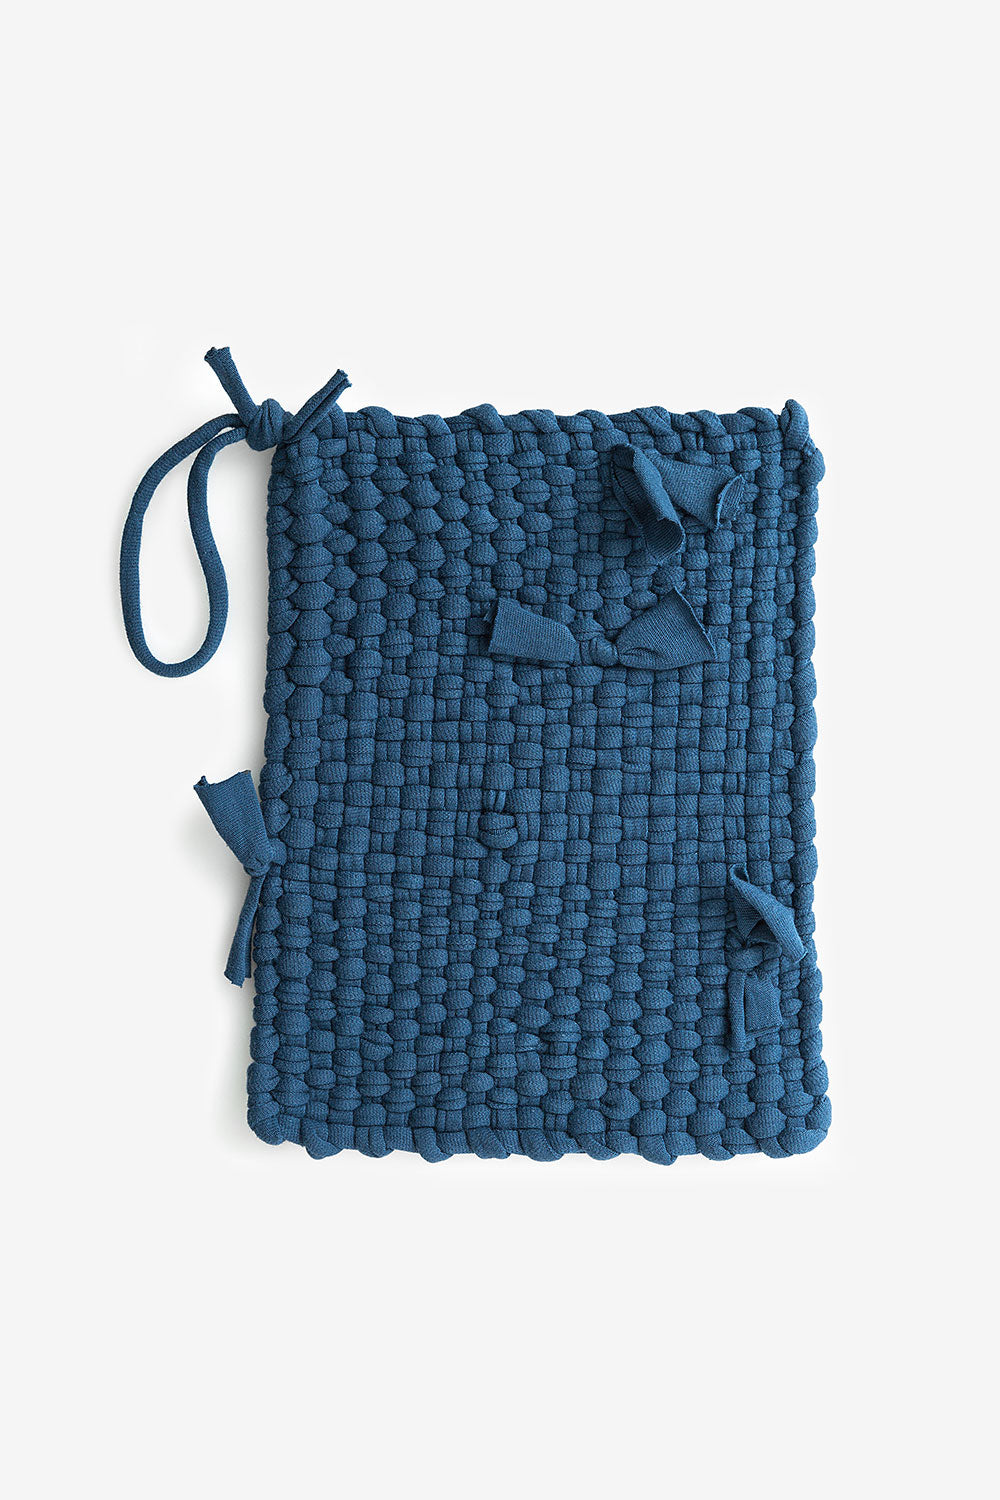 Alabama Chanin Hand-Loomed Potholder Made with Organic Cotton in Blue